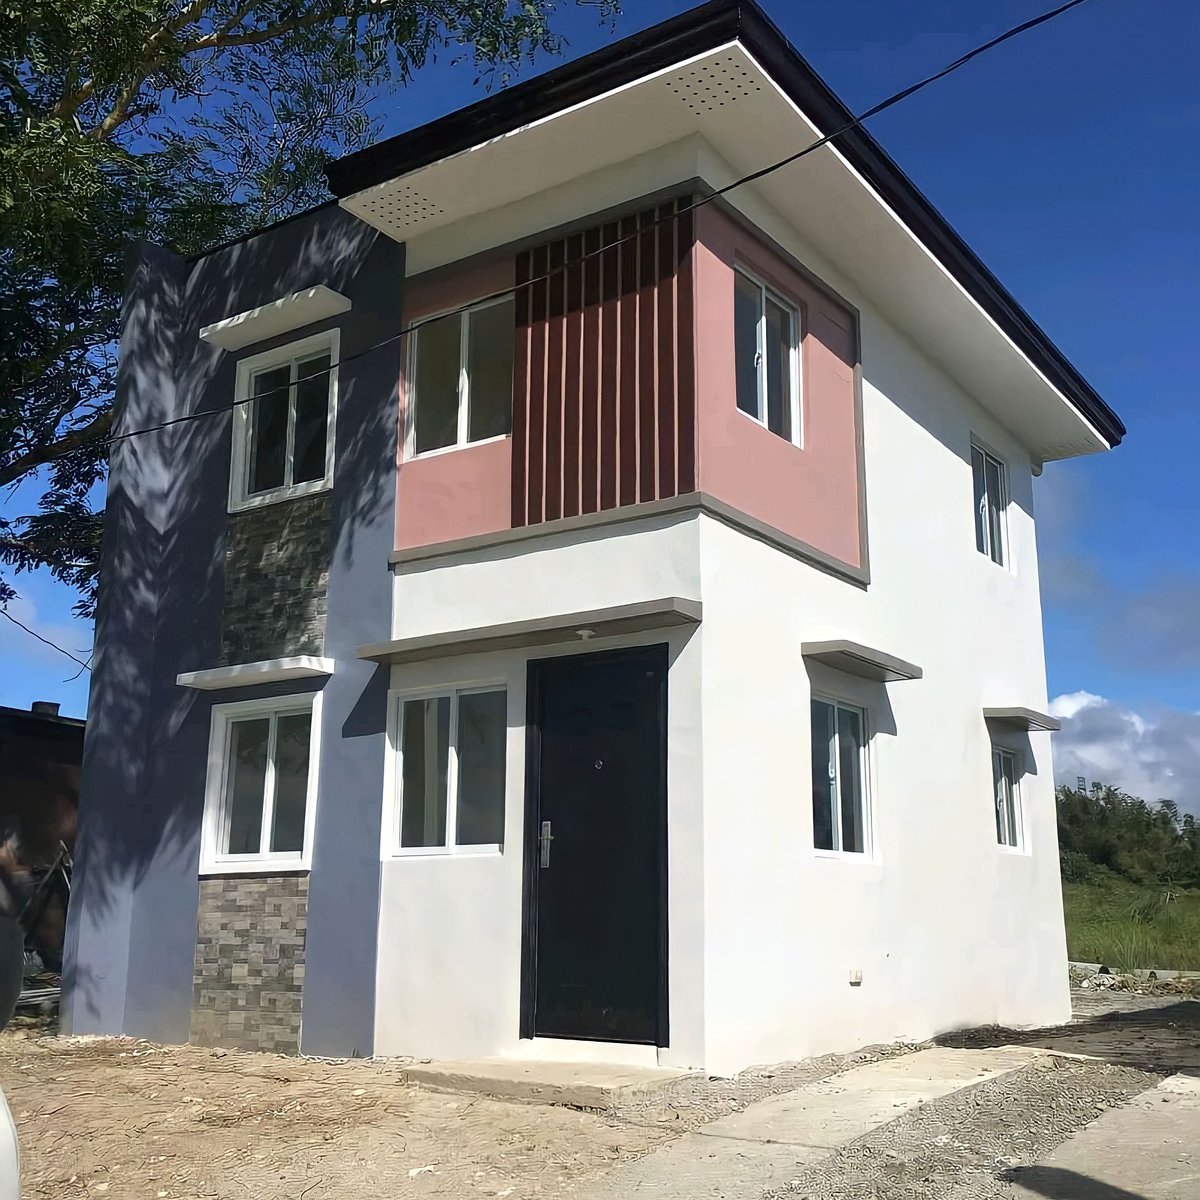 3 Bedroom Single Attached House for Sale in Lipa Batangas